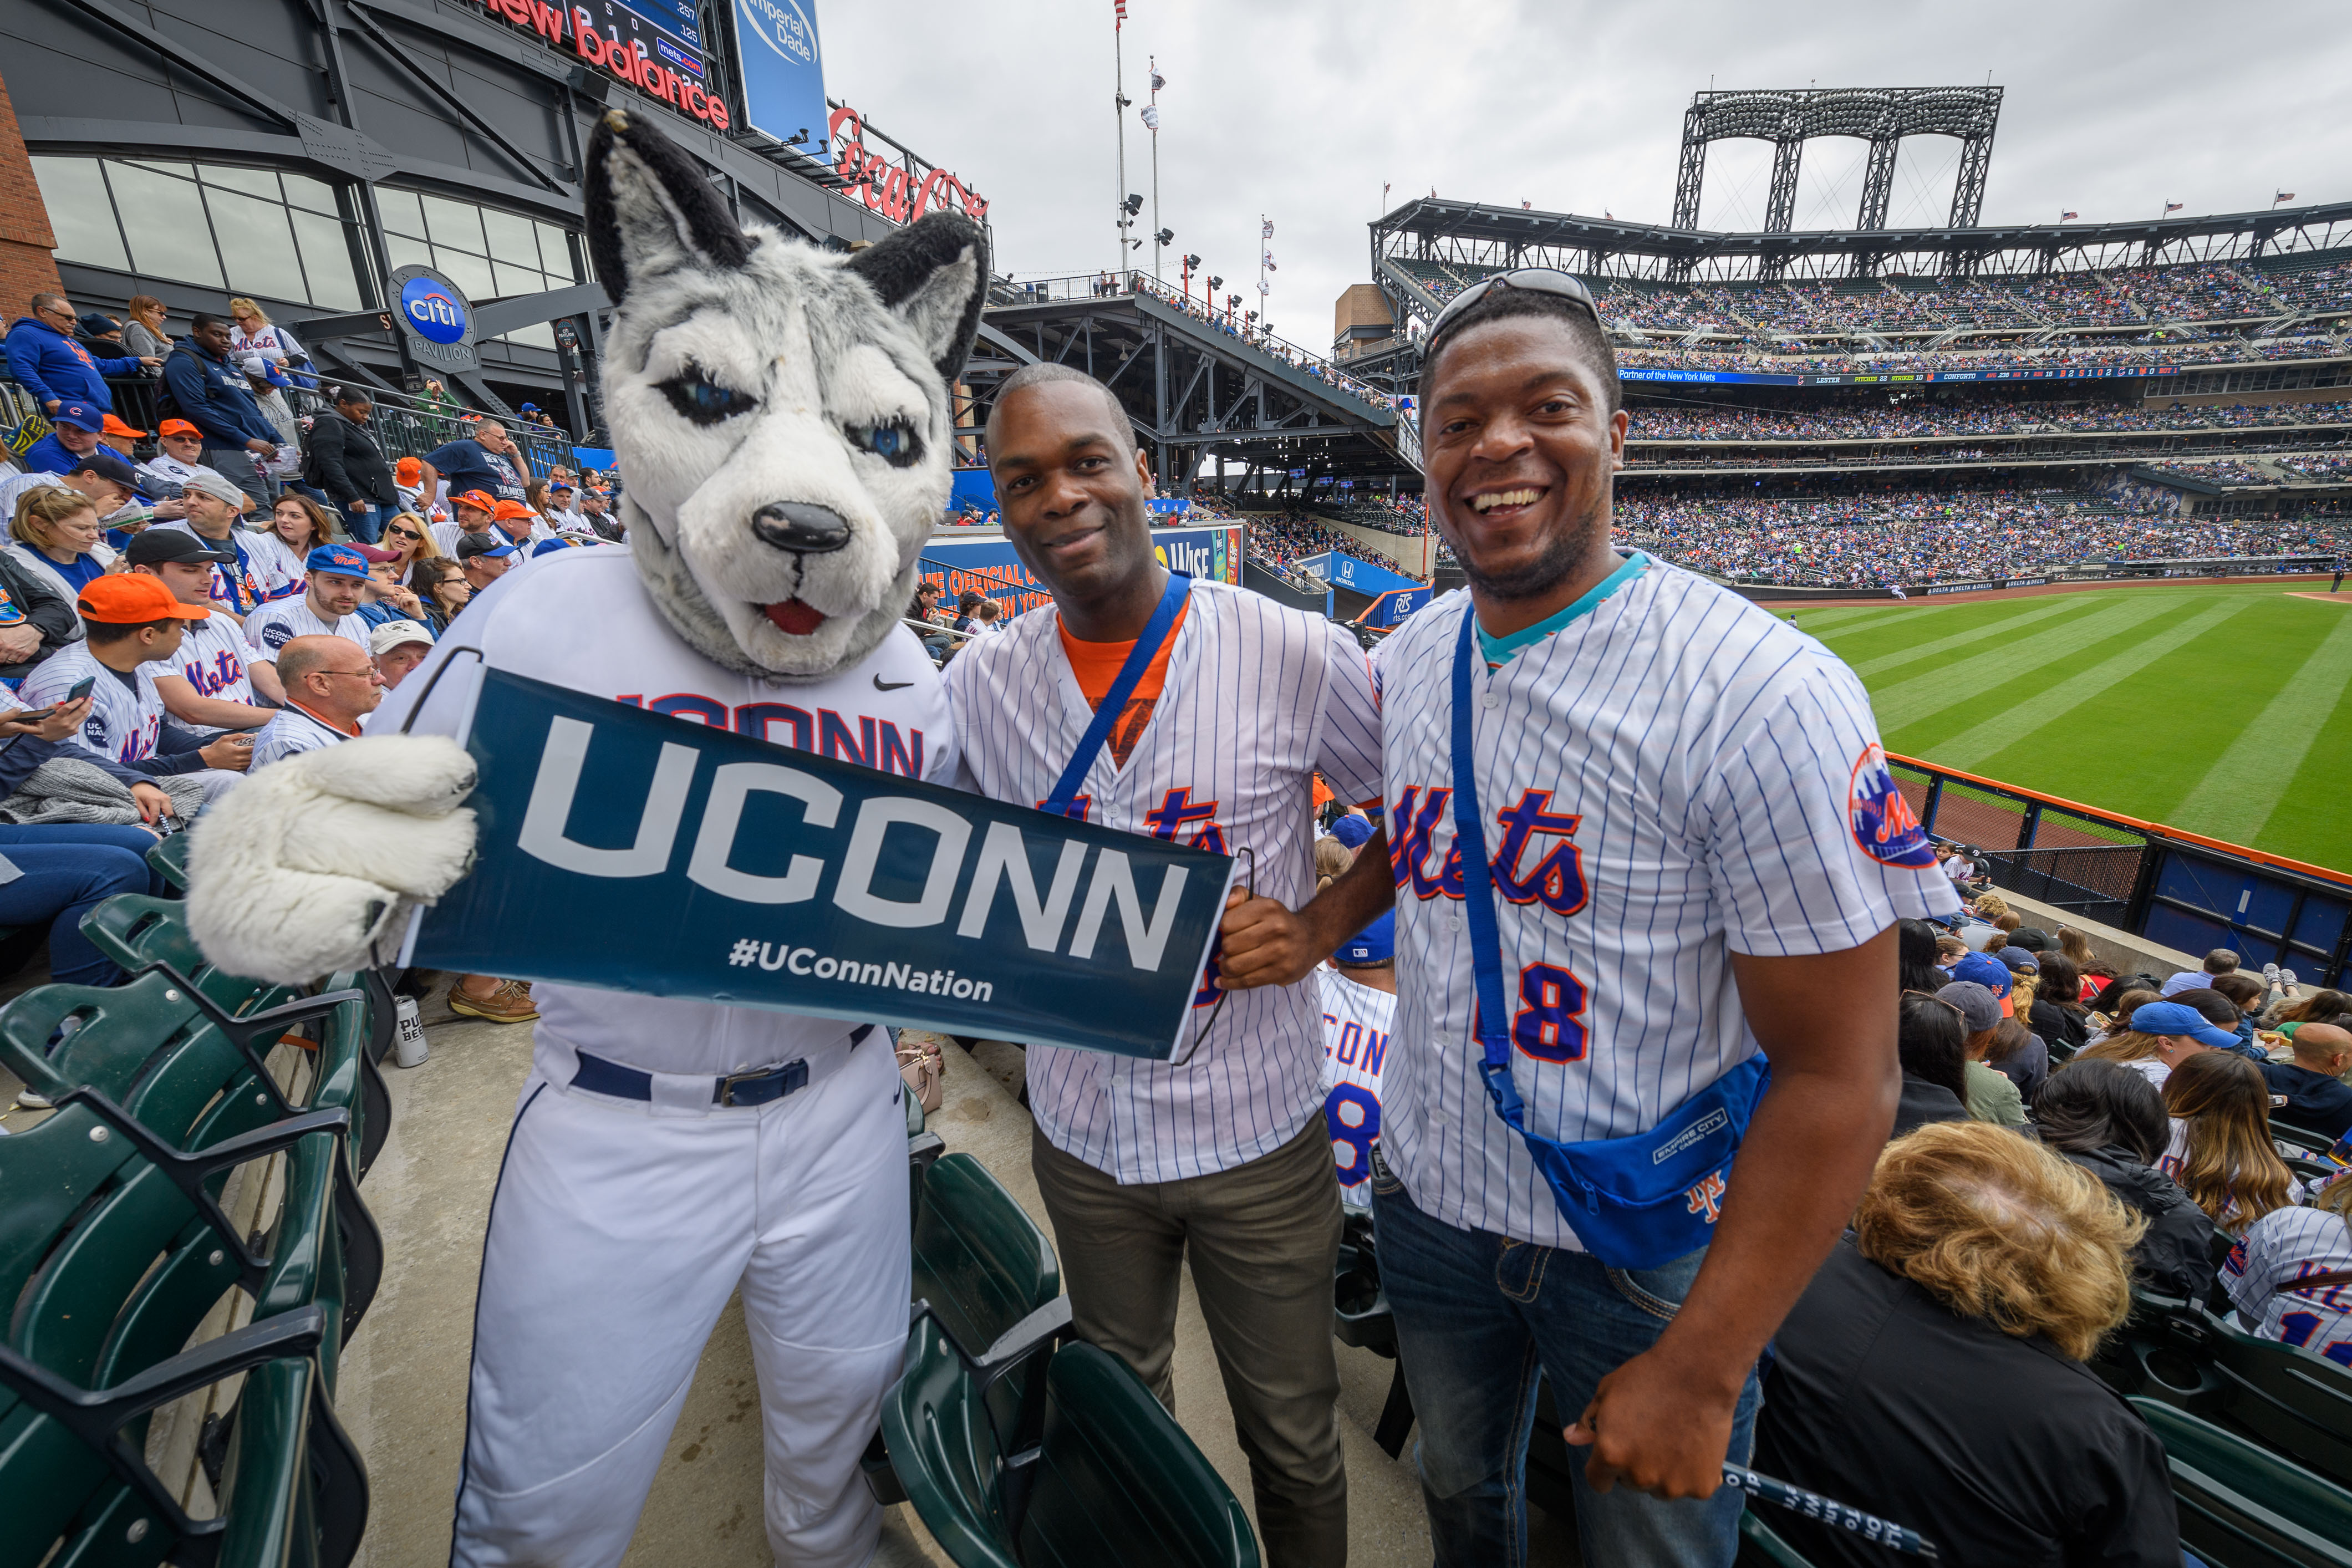 UConn Nation in Force at Citi Field